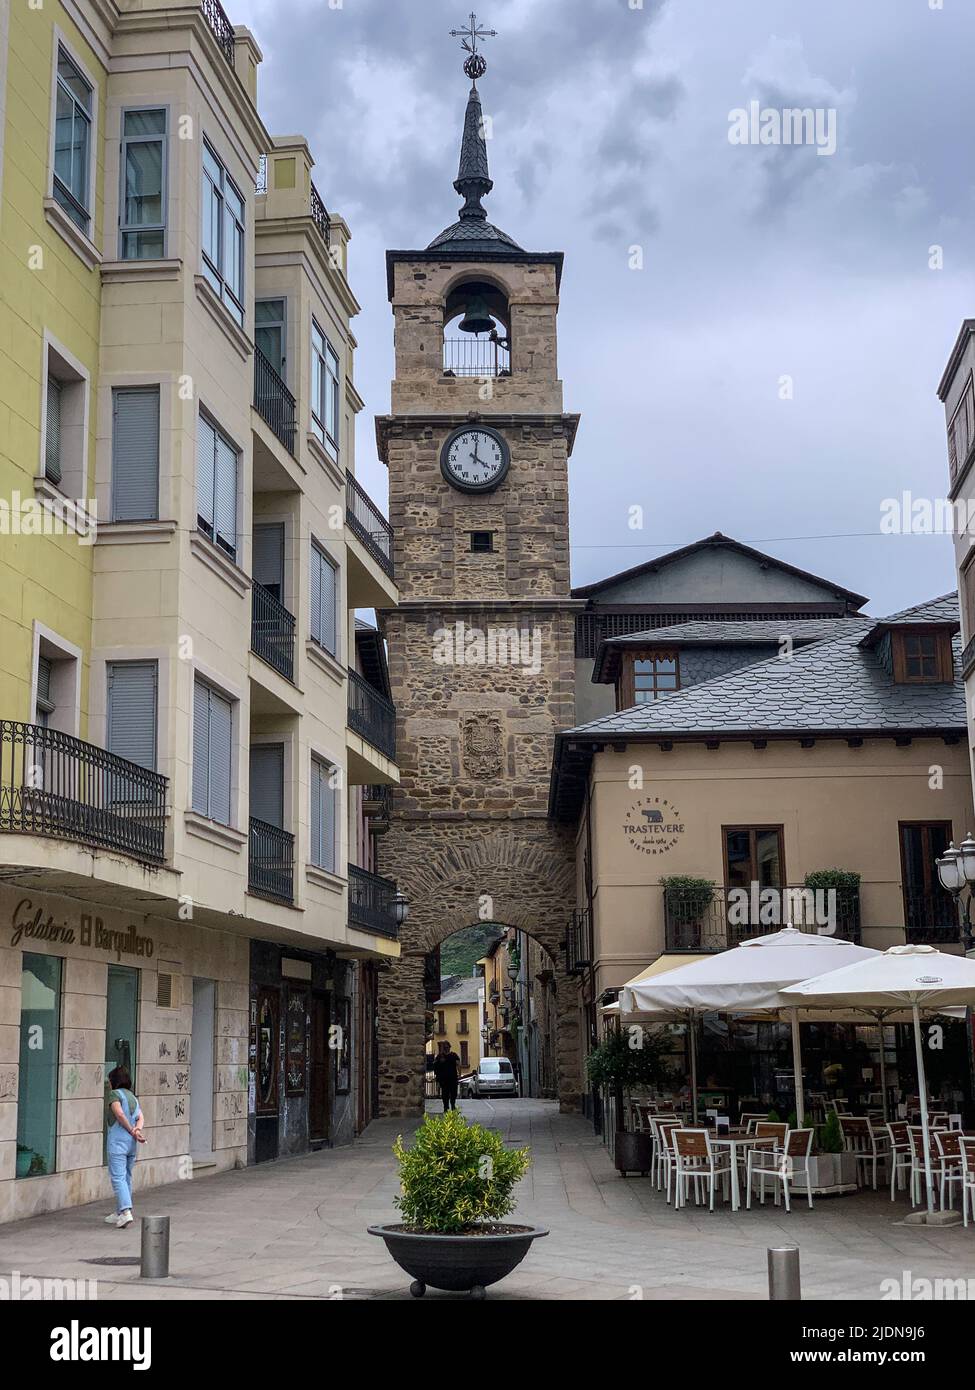 Spain, Ponferrada, Castilla y Leon. Torre del Reloj, Clock Tower, 16th Century. The only remaining original gate to the city's medieval wall. Stock Photo